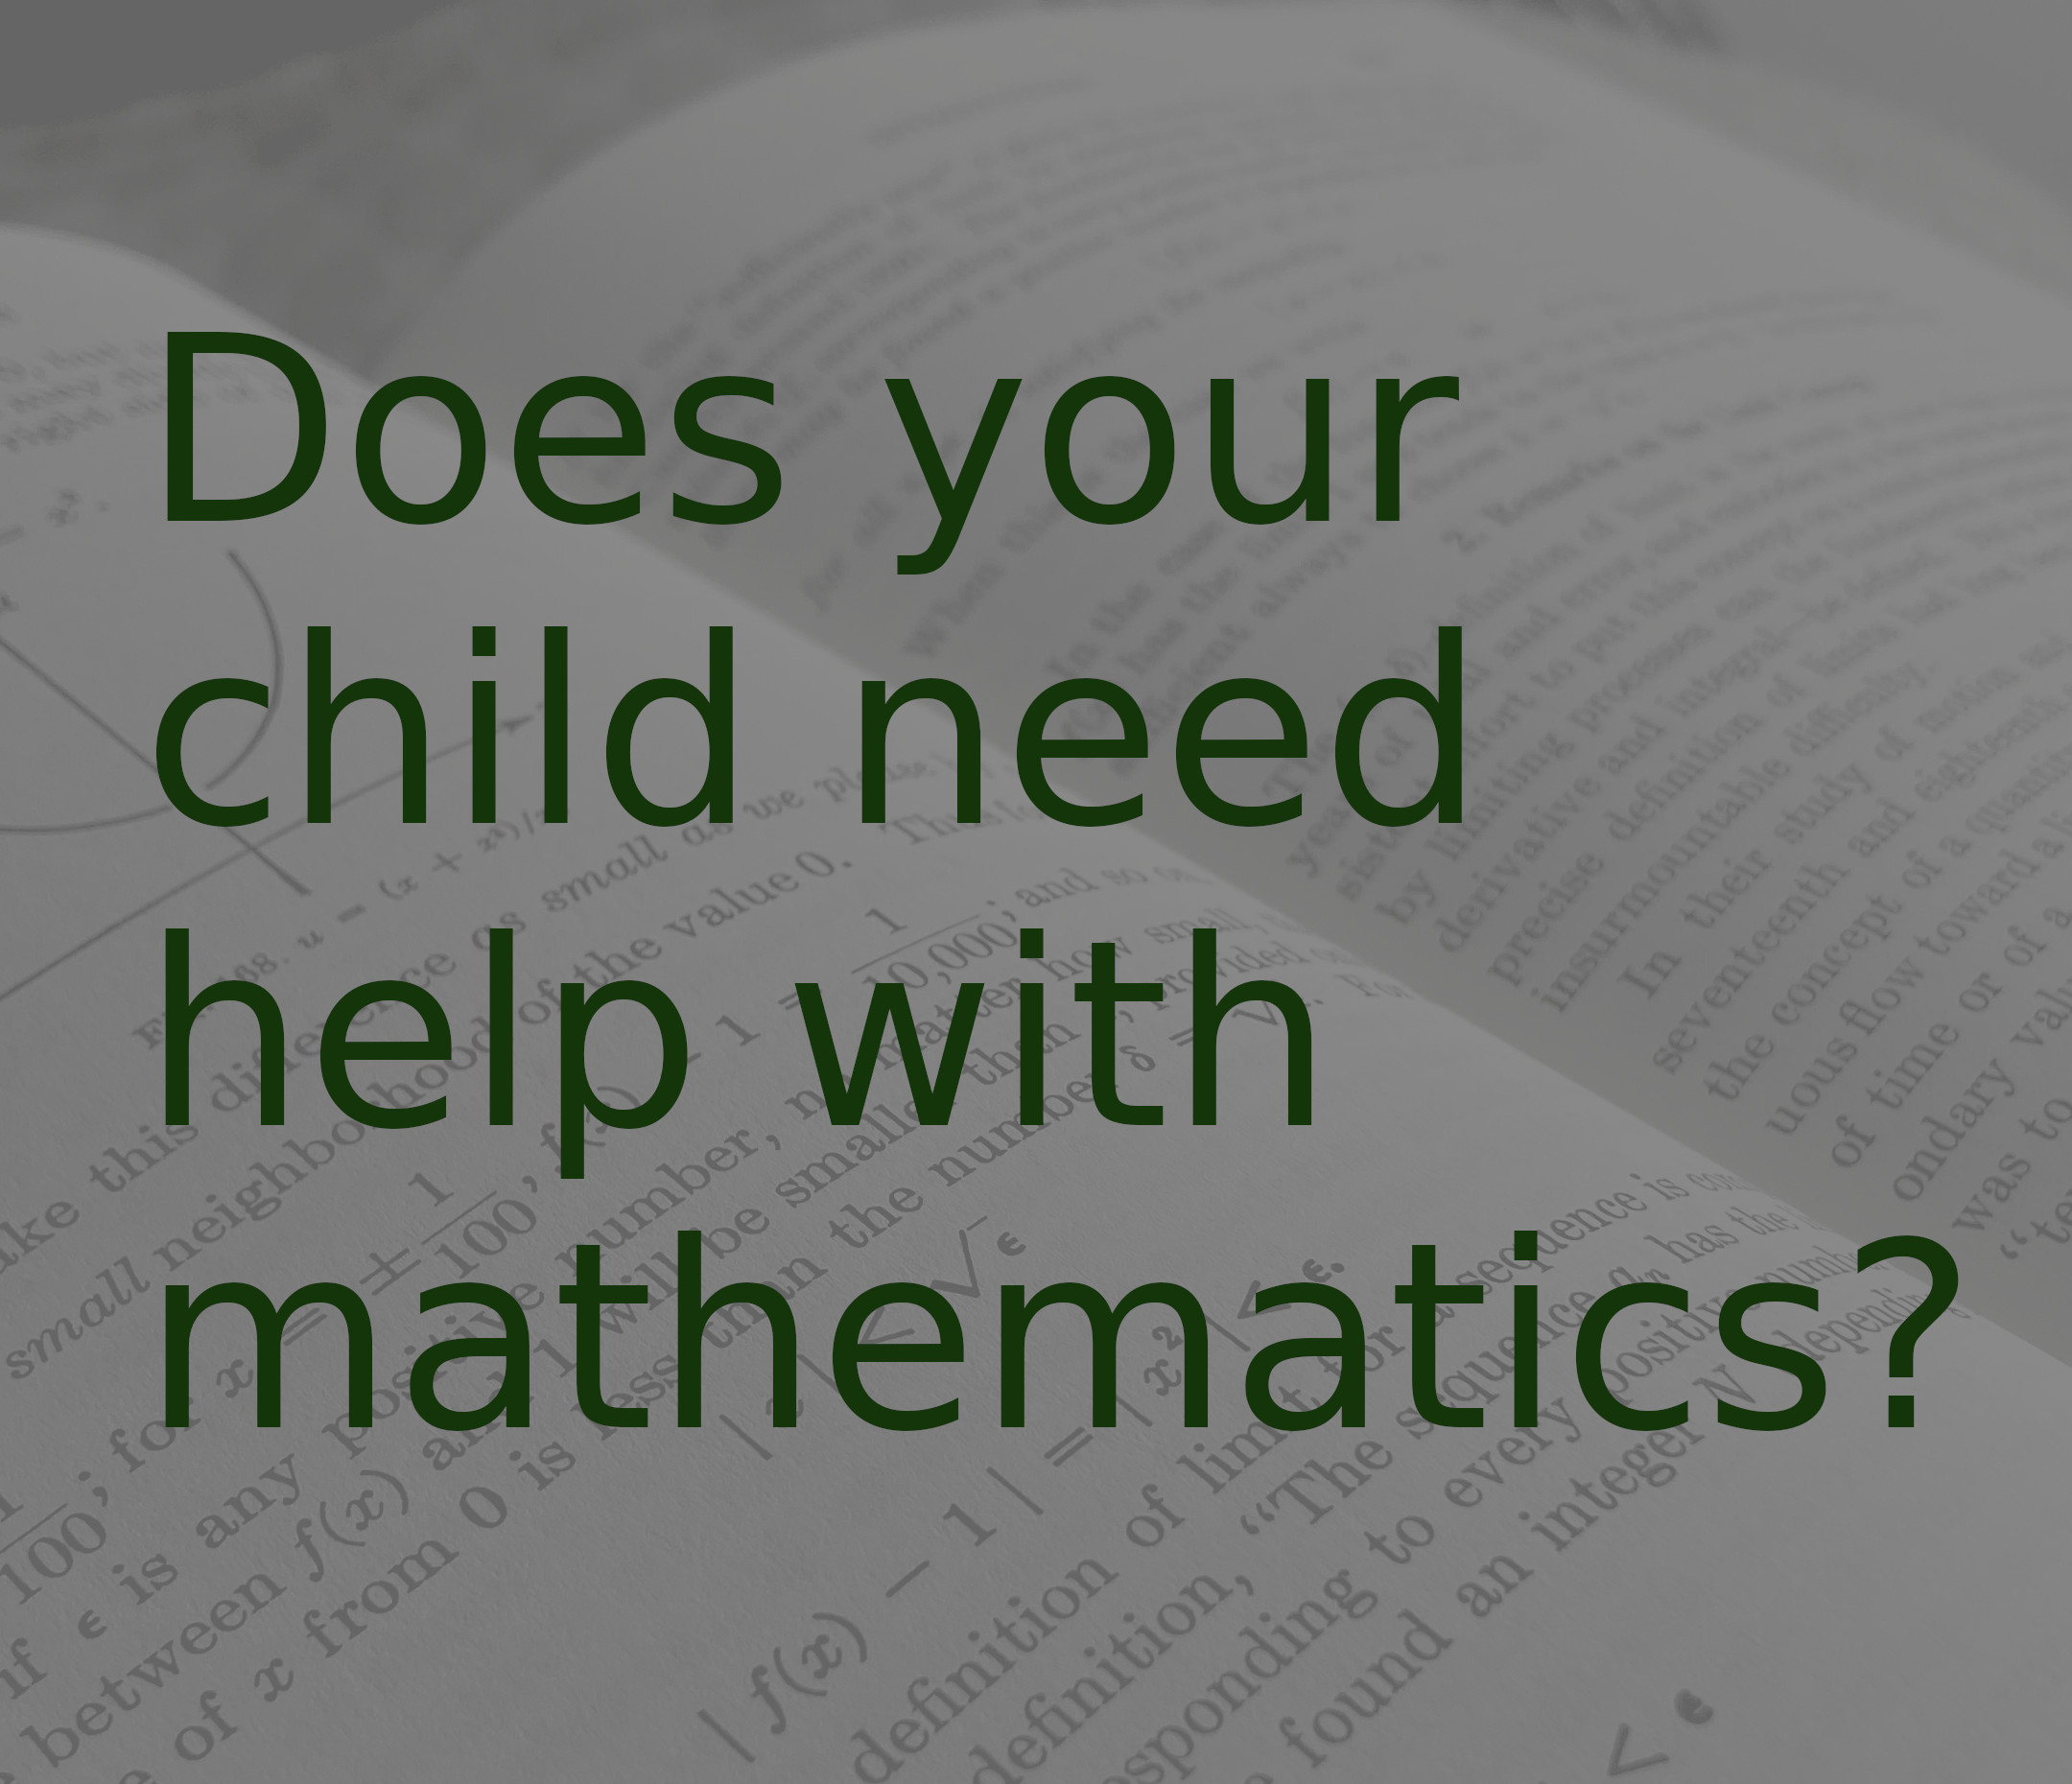 Does your child need help with mathematics?